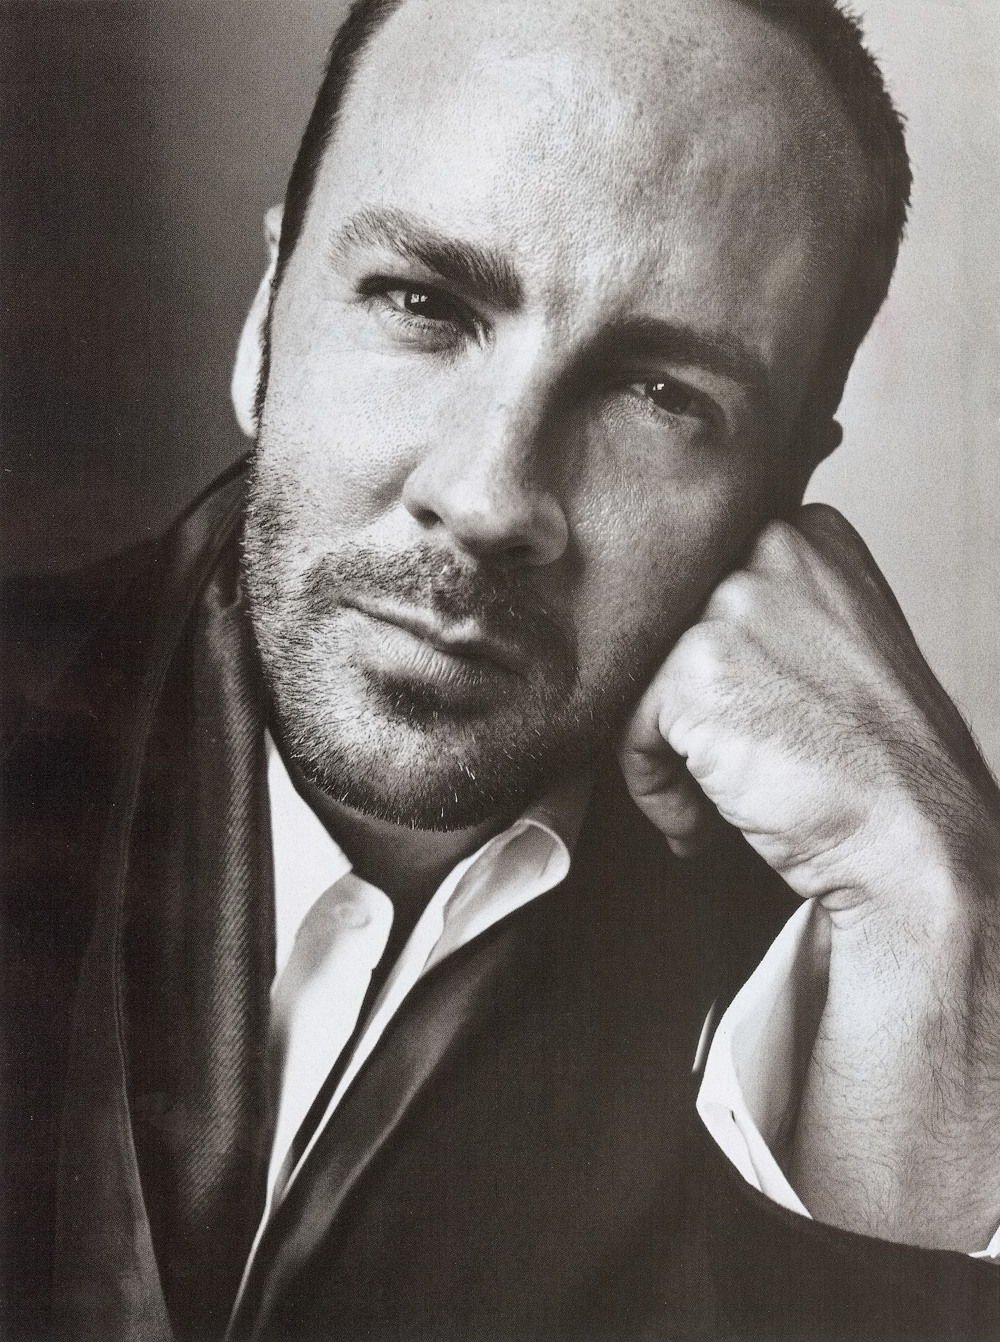 Tom Ford photo 16 of 76 pics, wallpaper - photo #237852 - ThePlace2